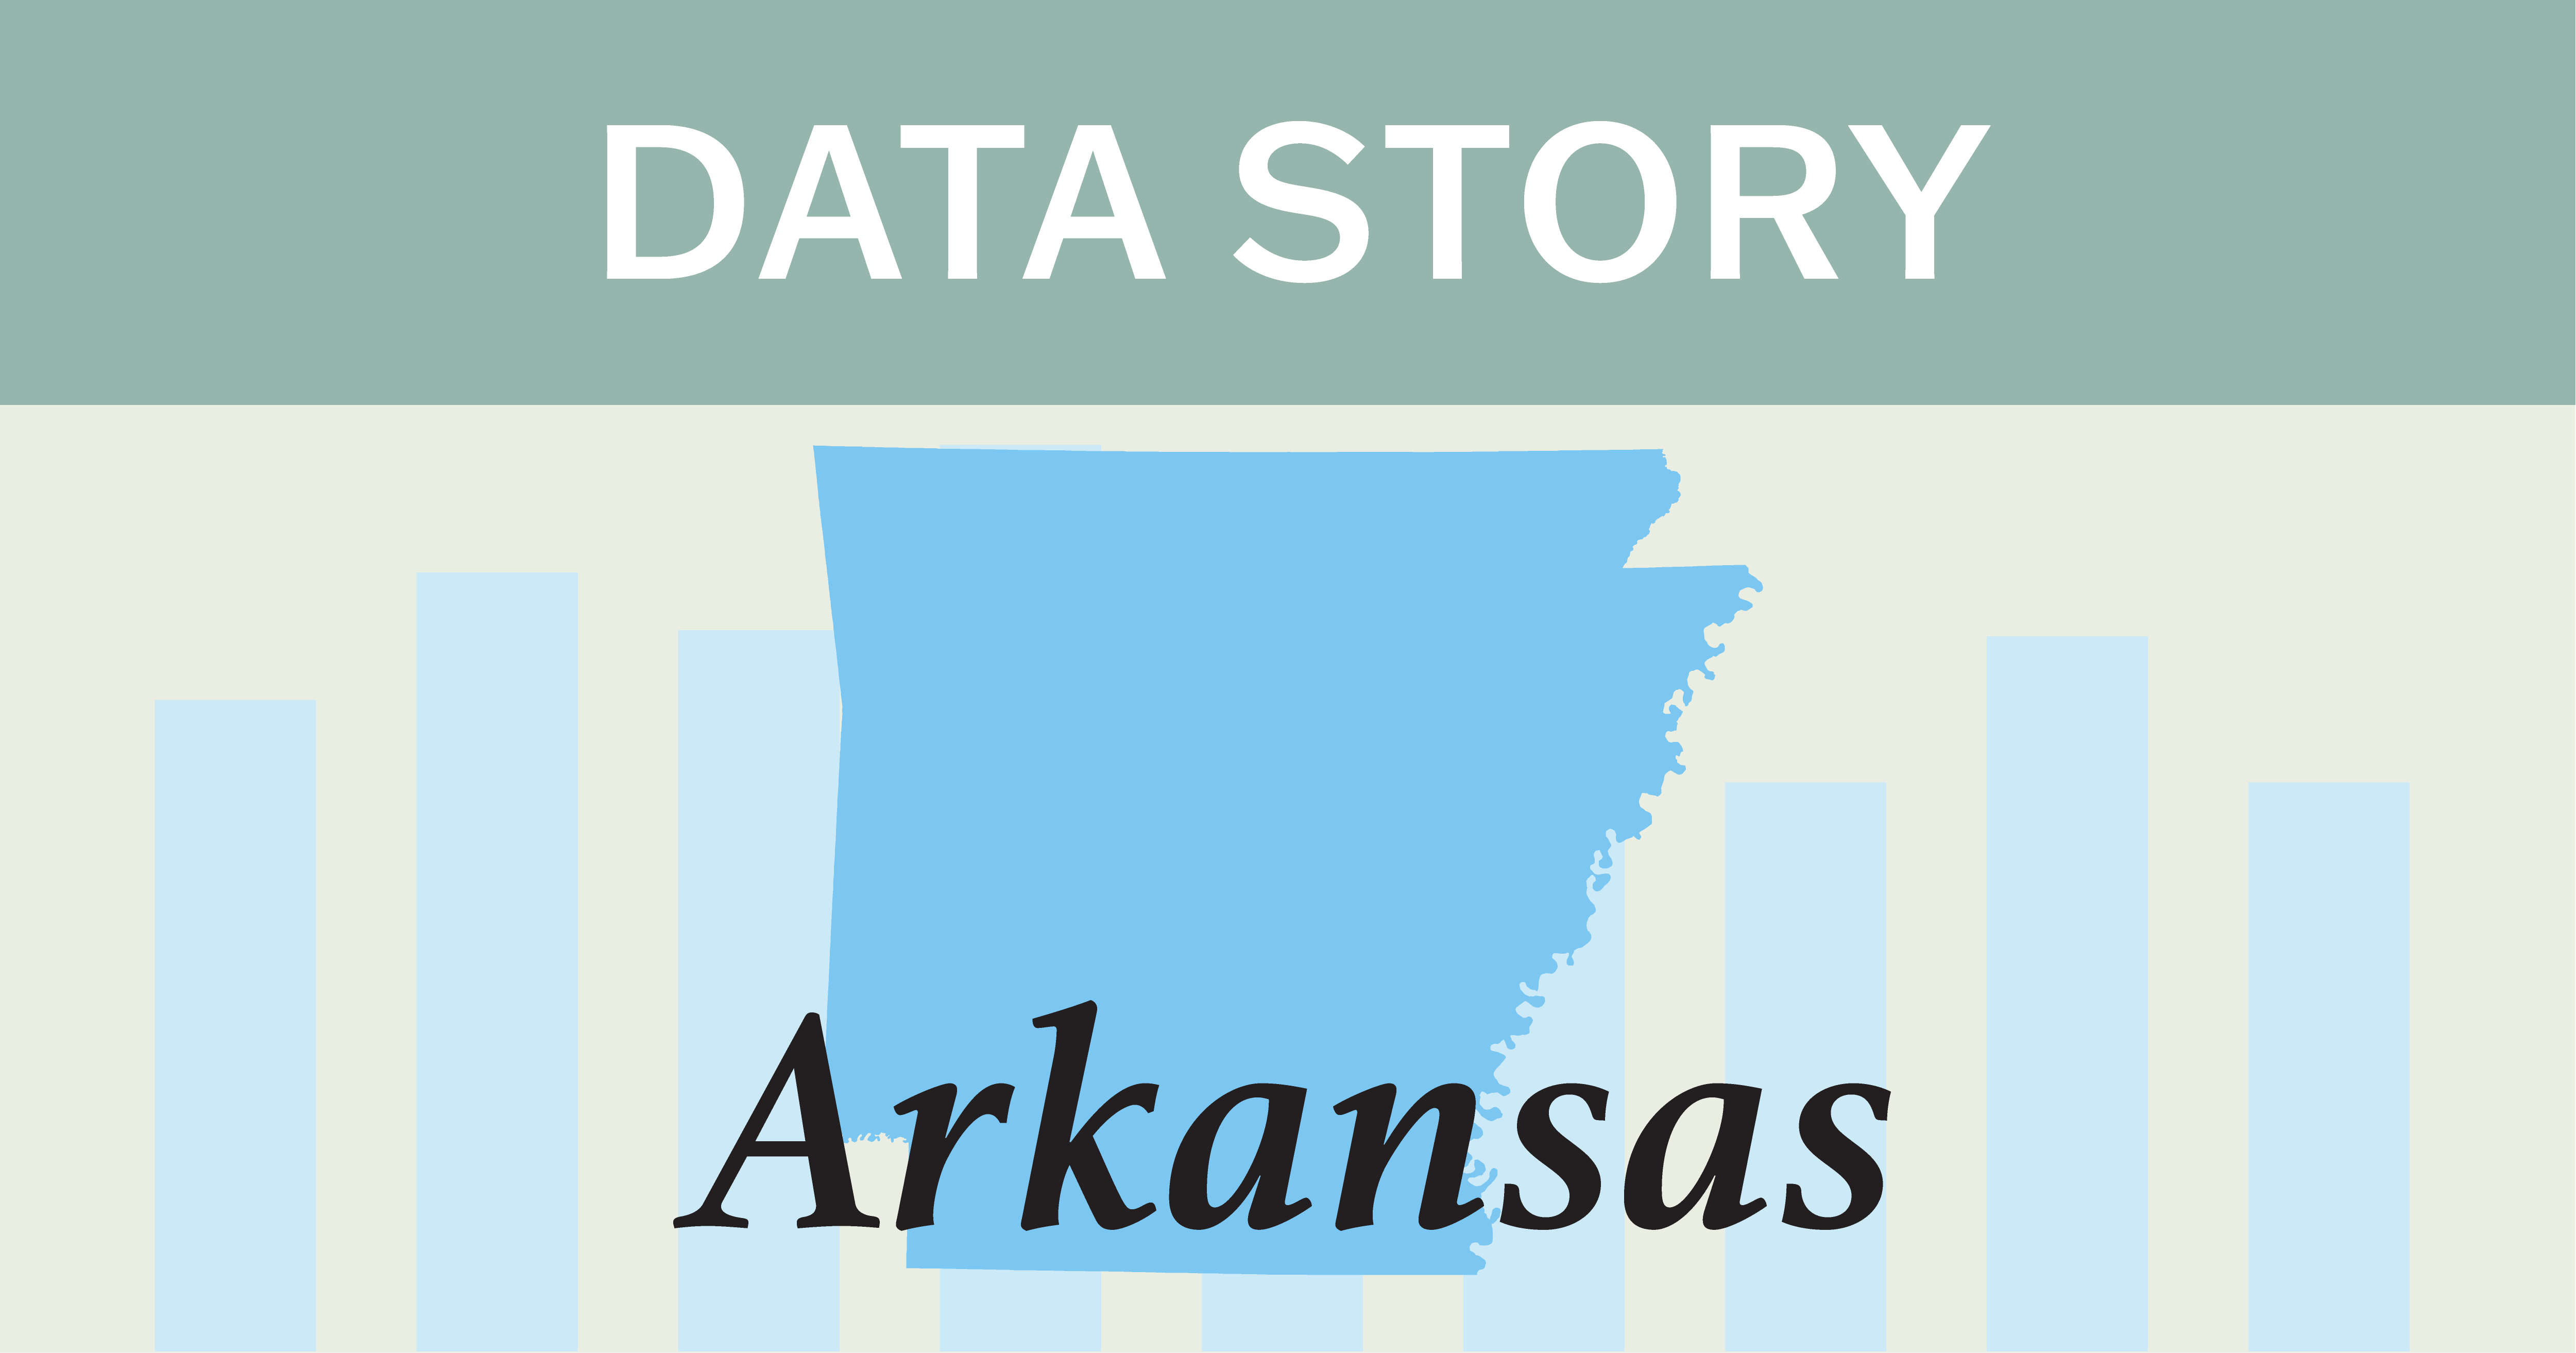 Outline of the state of Arkansas.